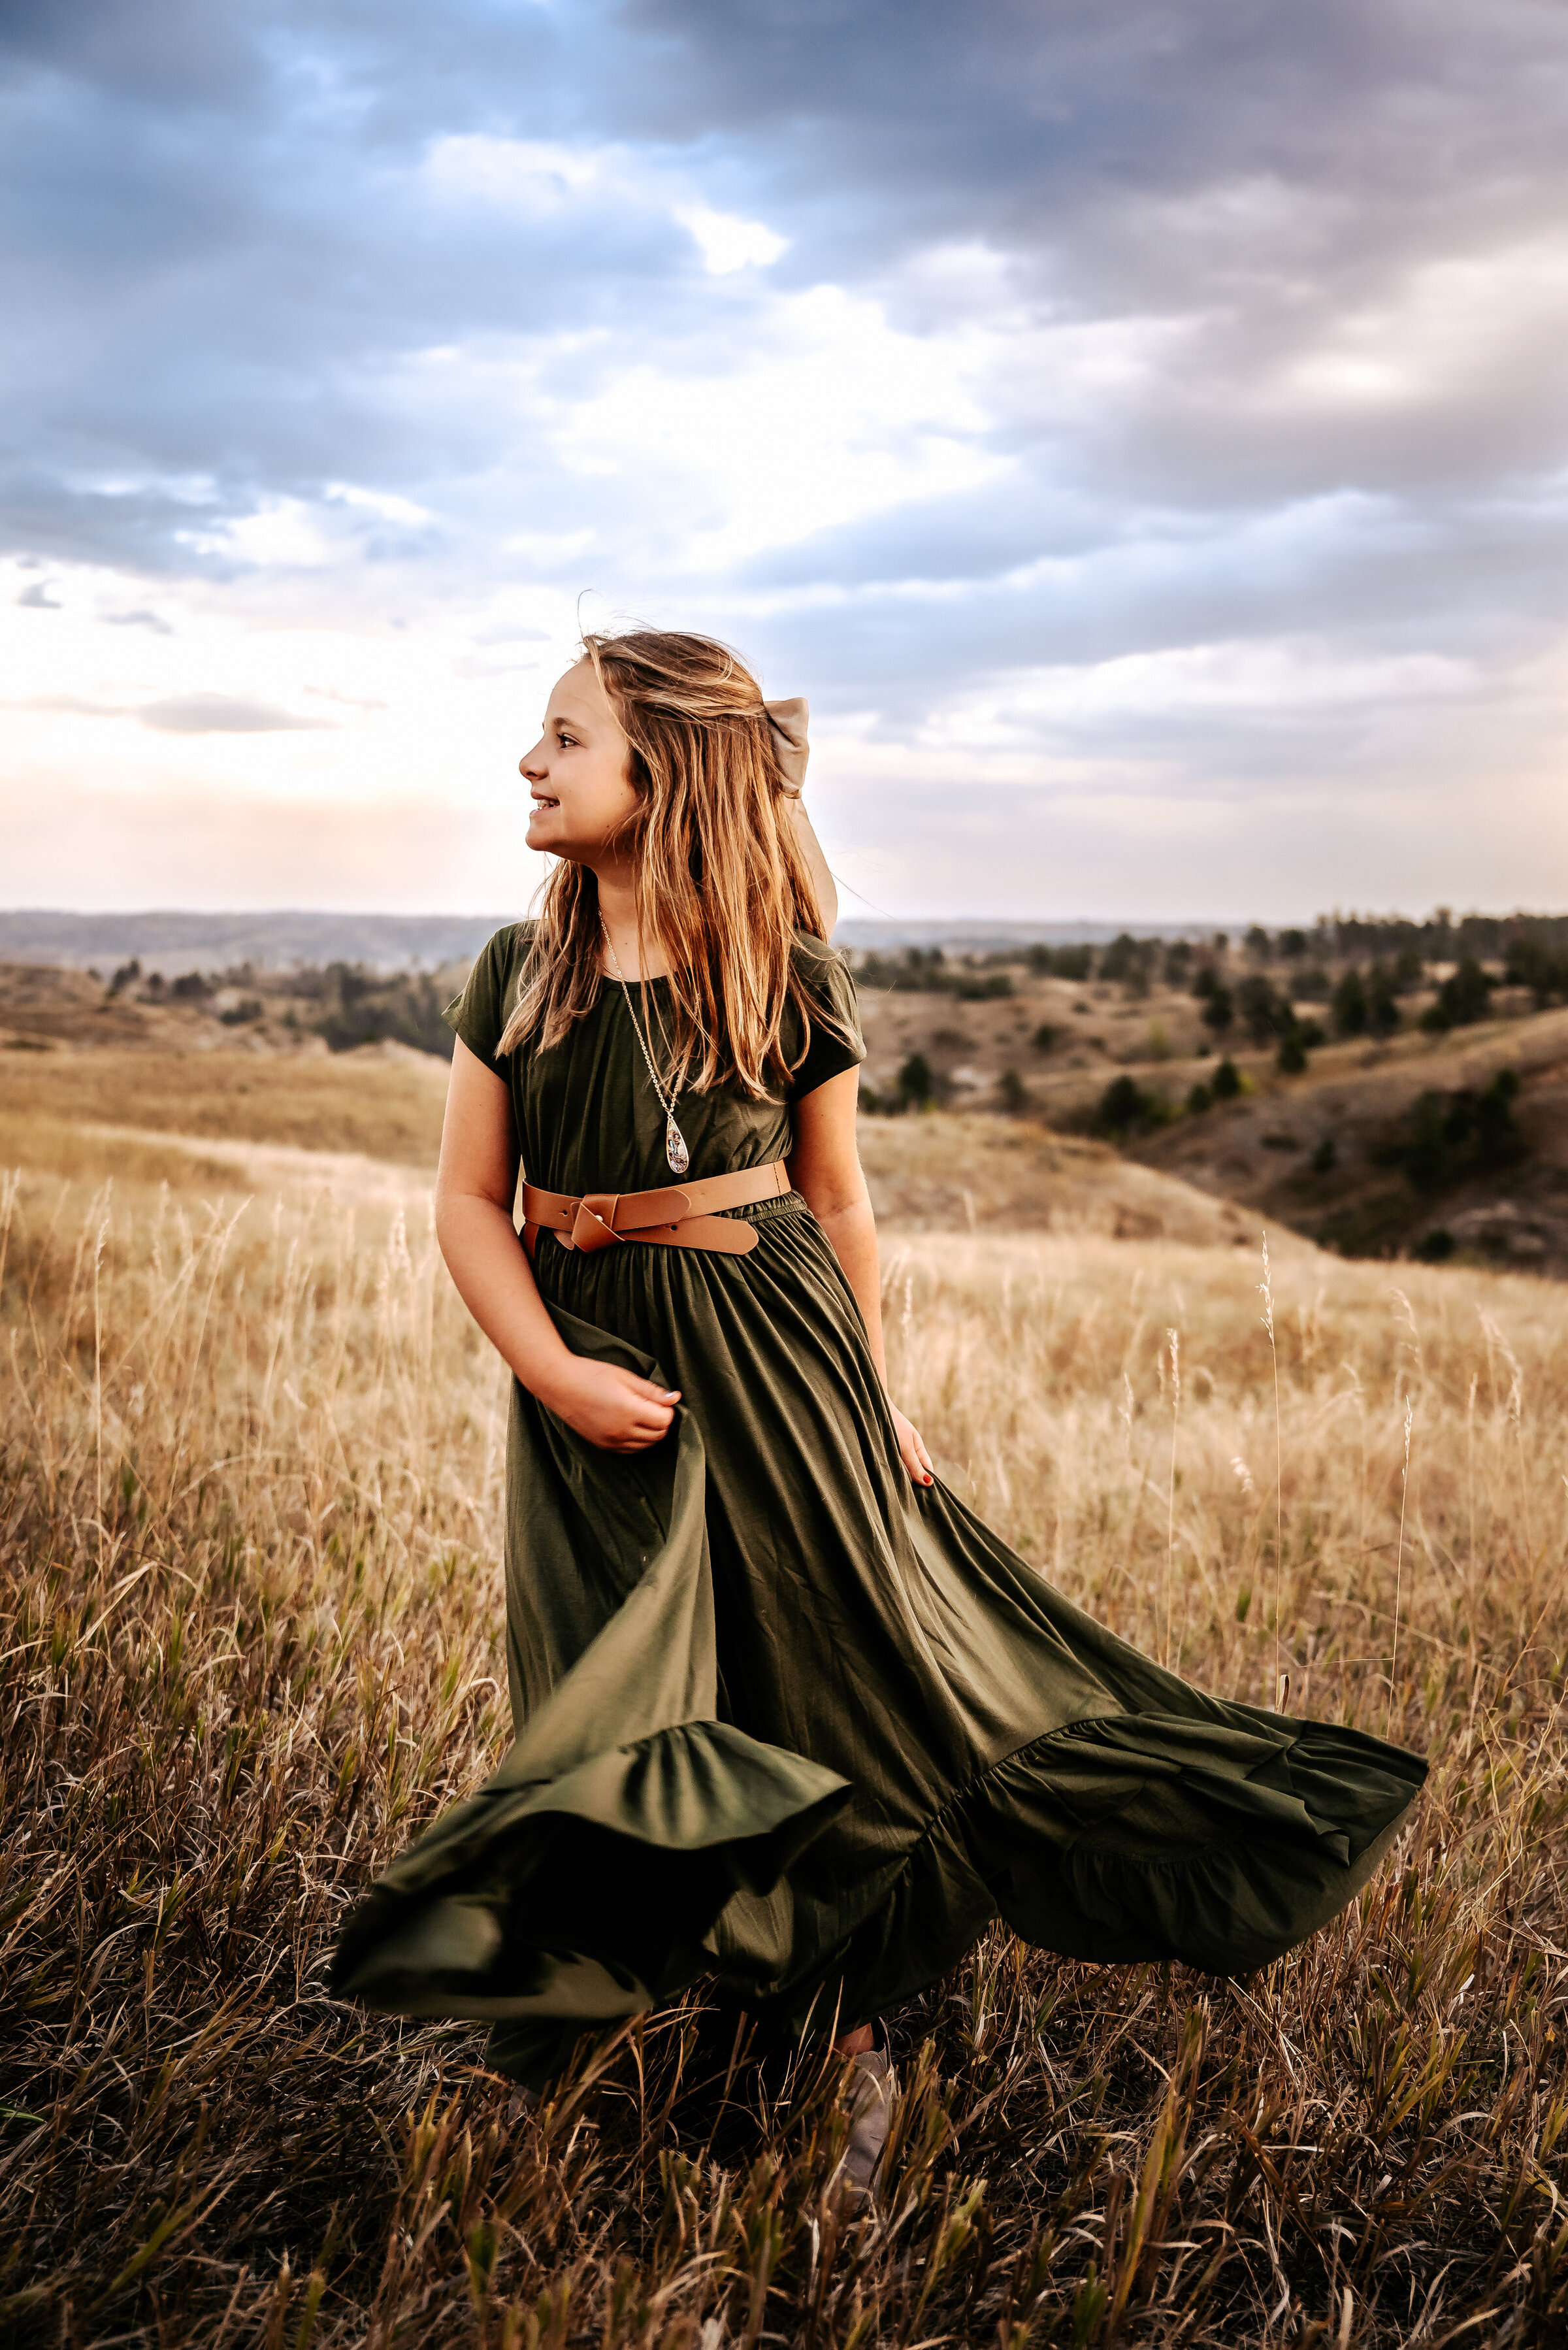 Girl smiles and twirls green dress in chadron state park